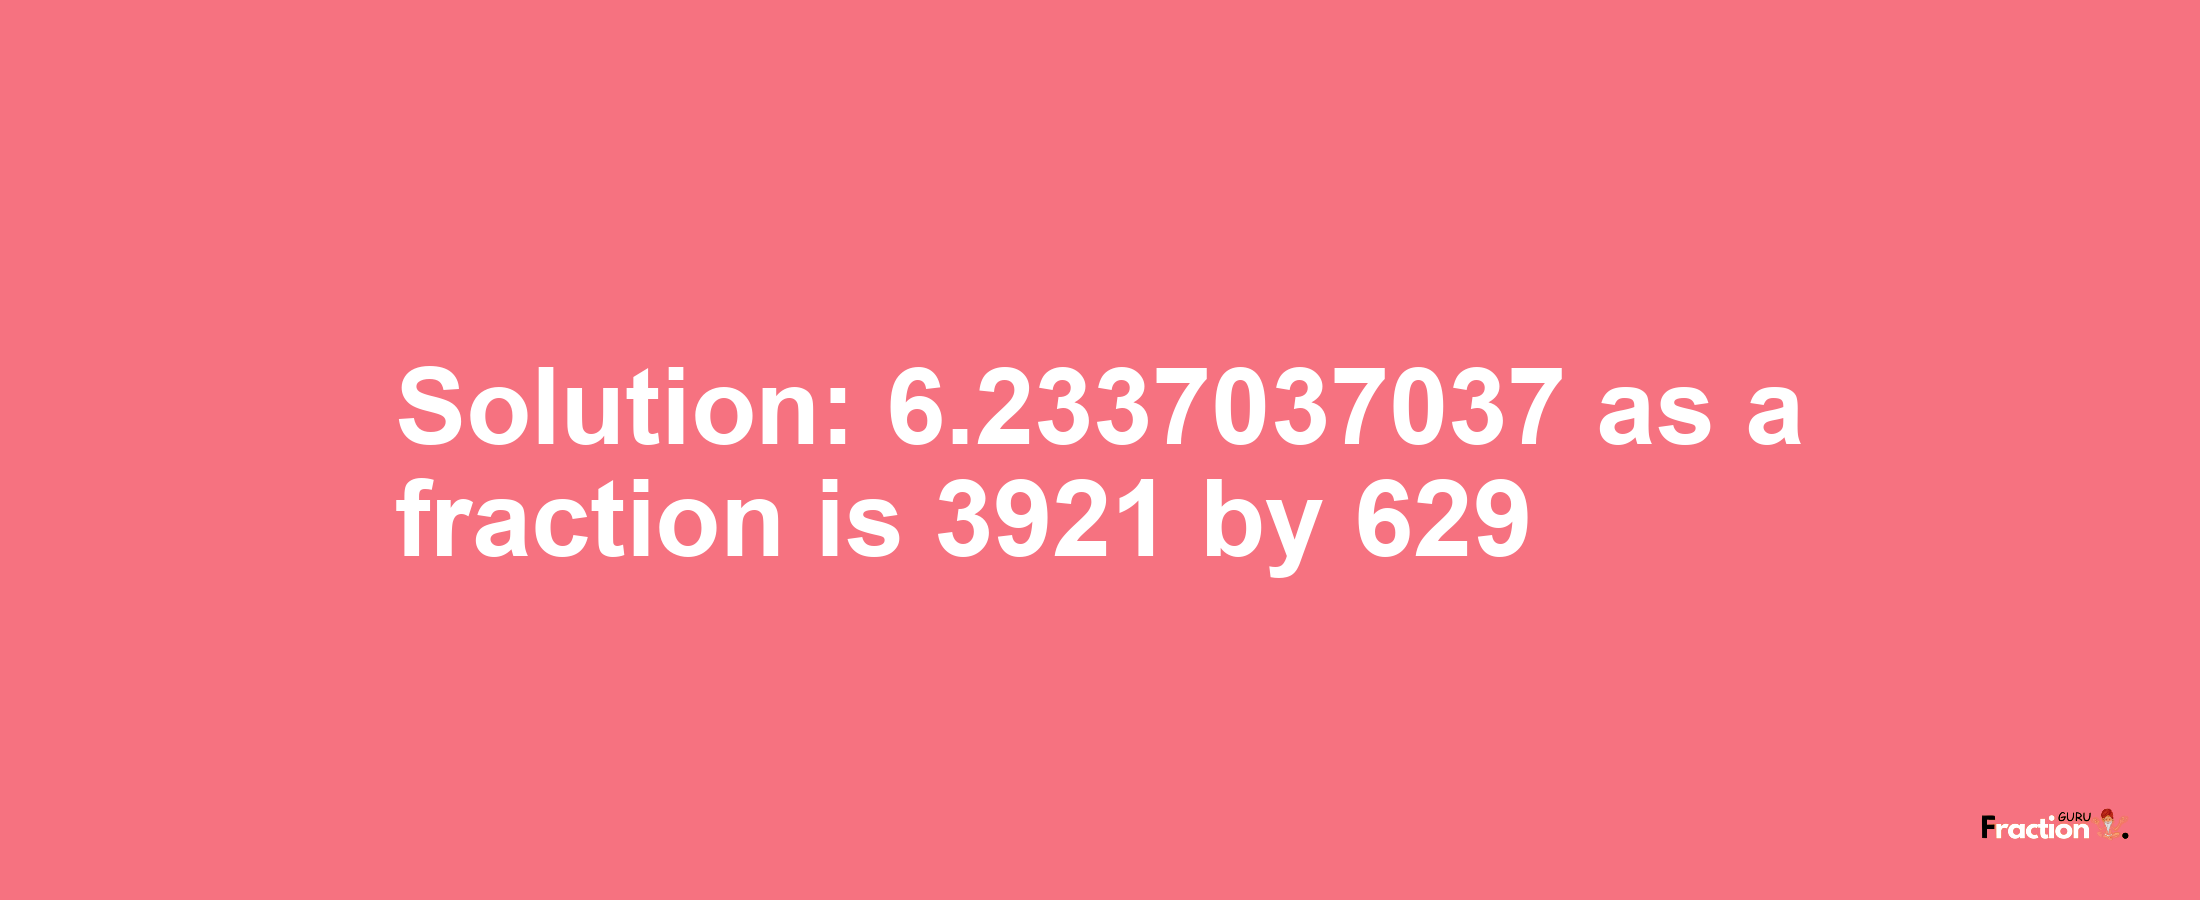 Solution:6.2337037037 as a fraction is 3921/629